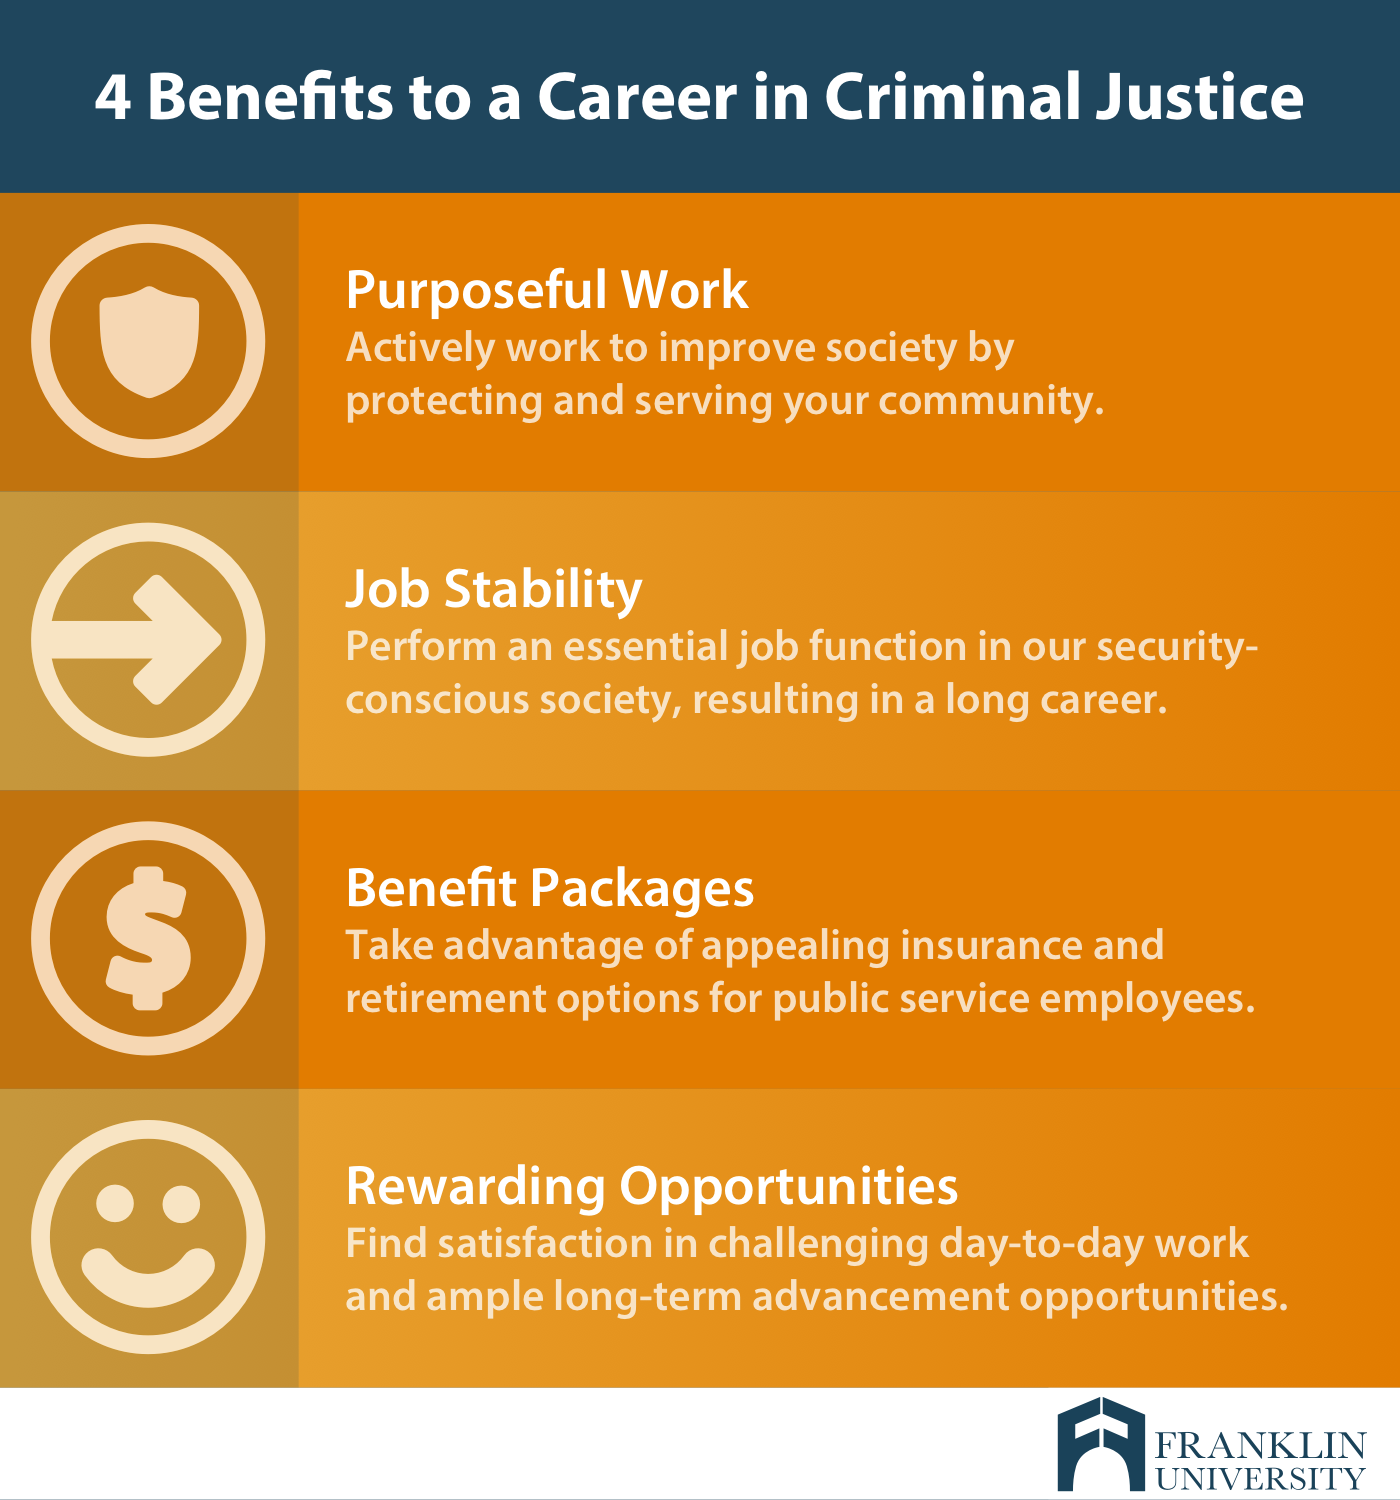 graphic describes 4 benefits to a career in criminal justice